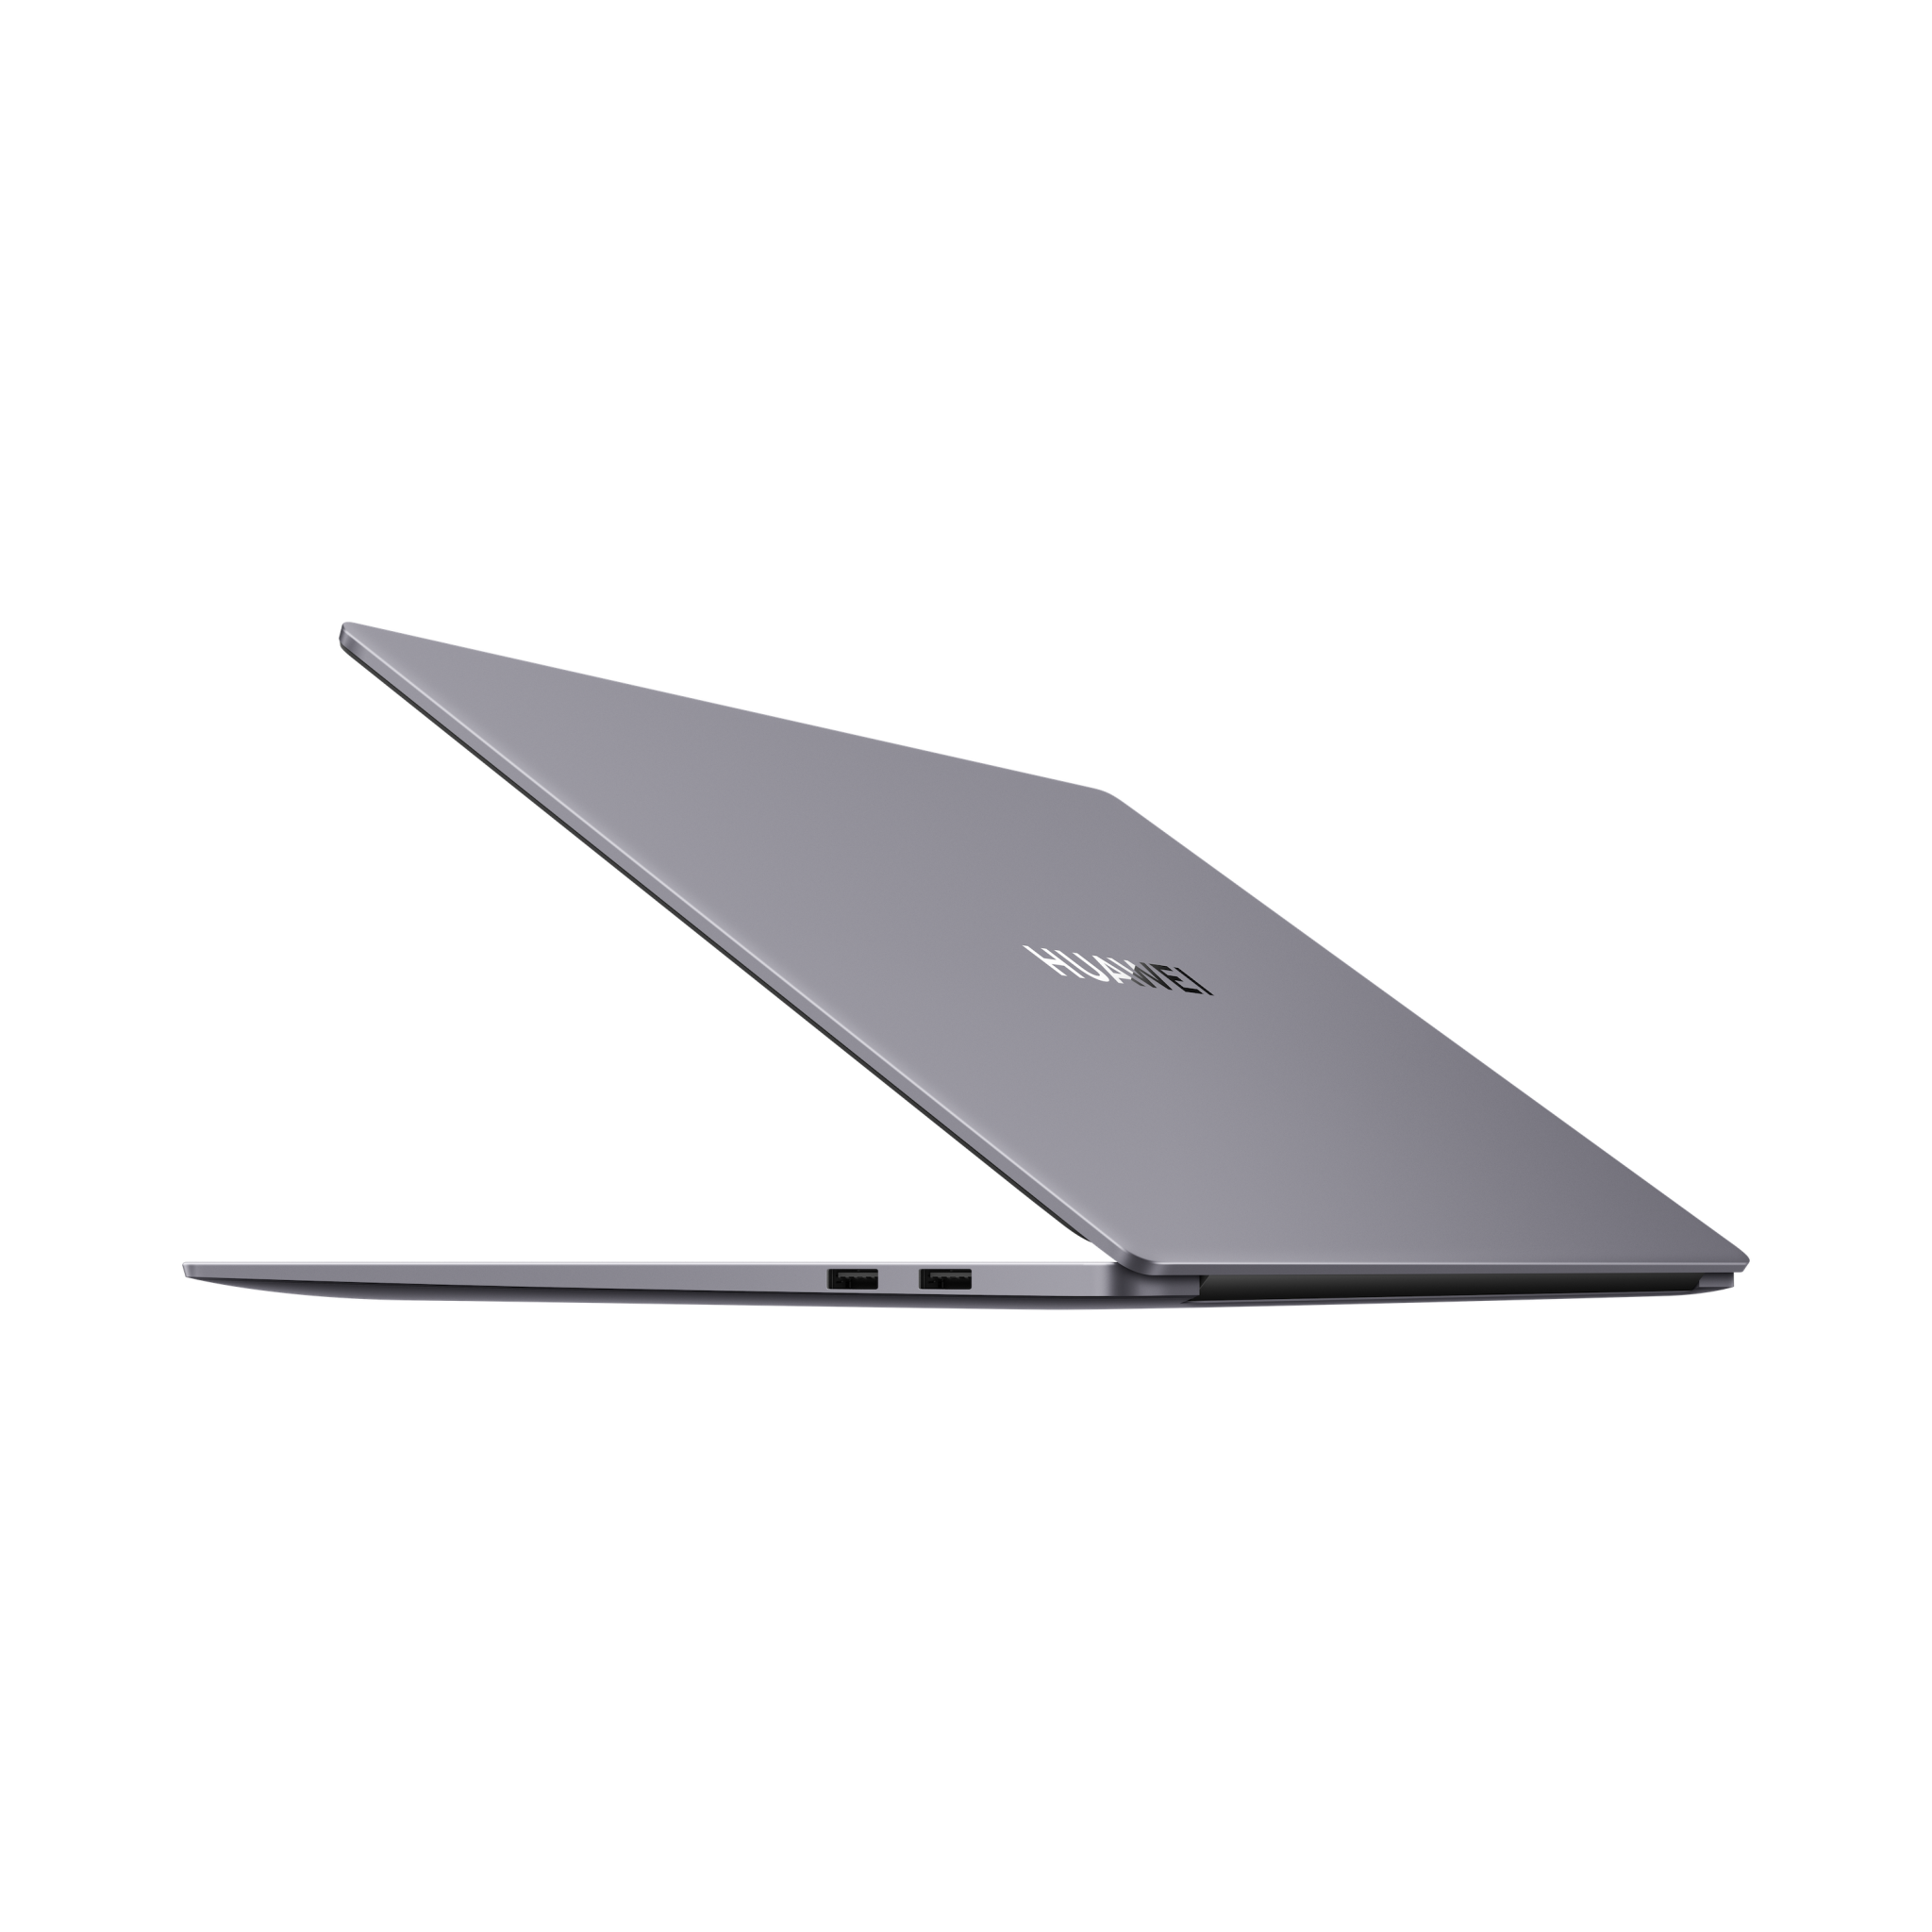 HUAWEI MateBook D16: the laptop for work and study